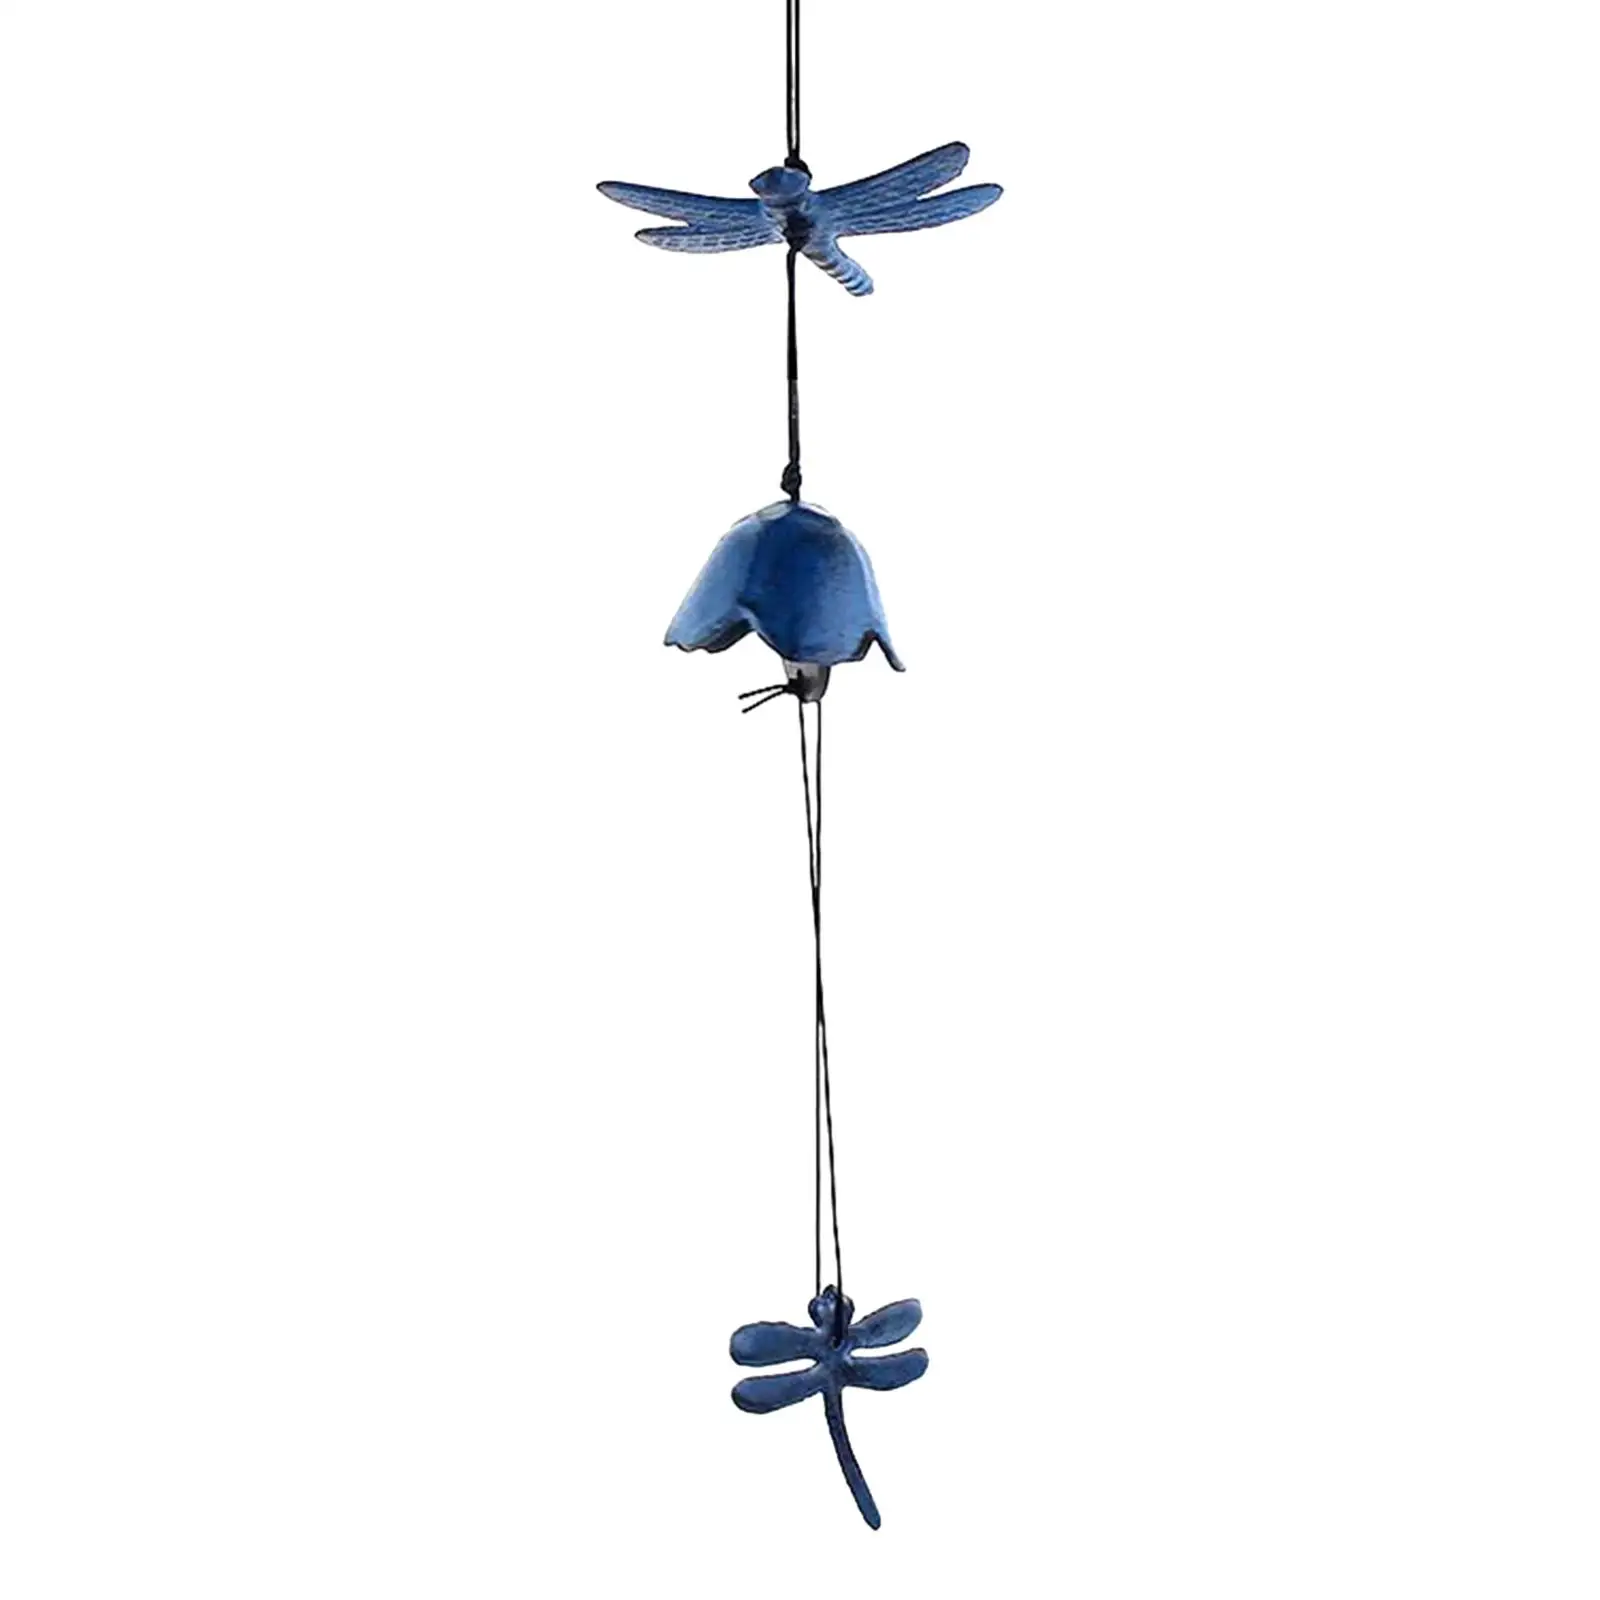 Japanese Wind Chime Dragonfly Wind Bell for Farmhouse Garden